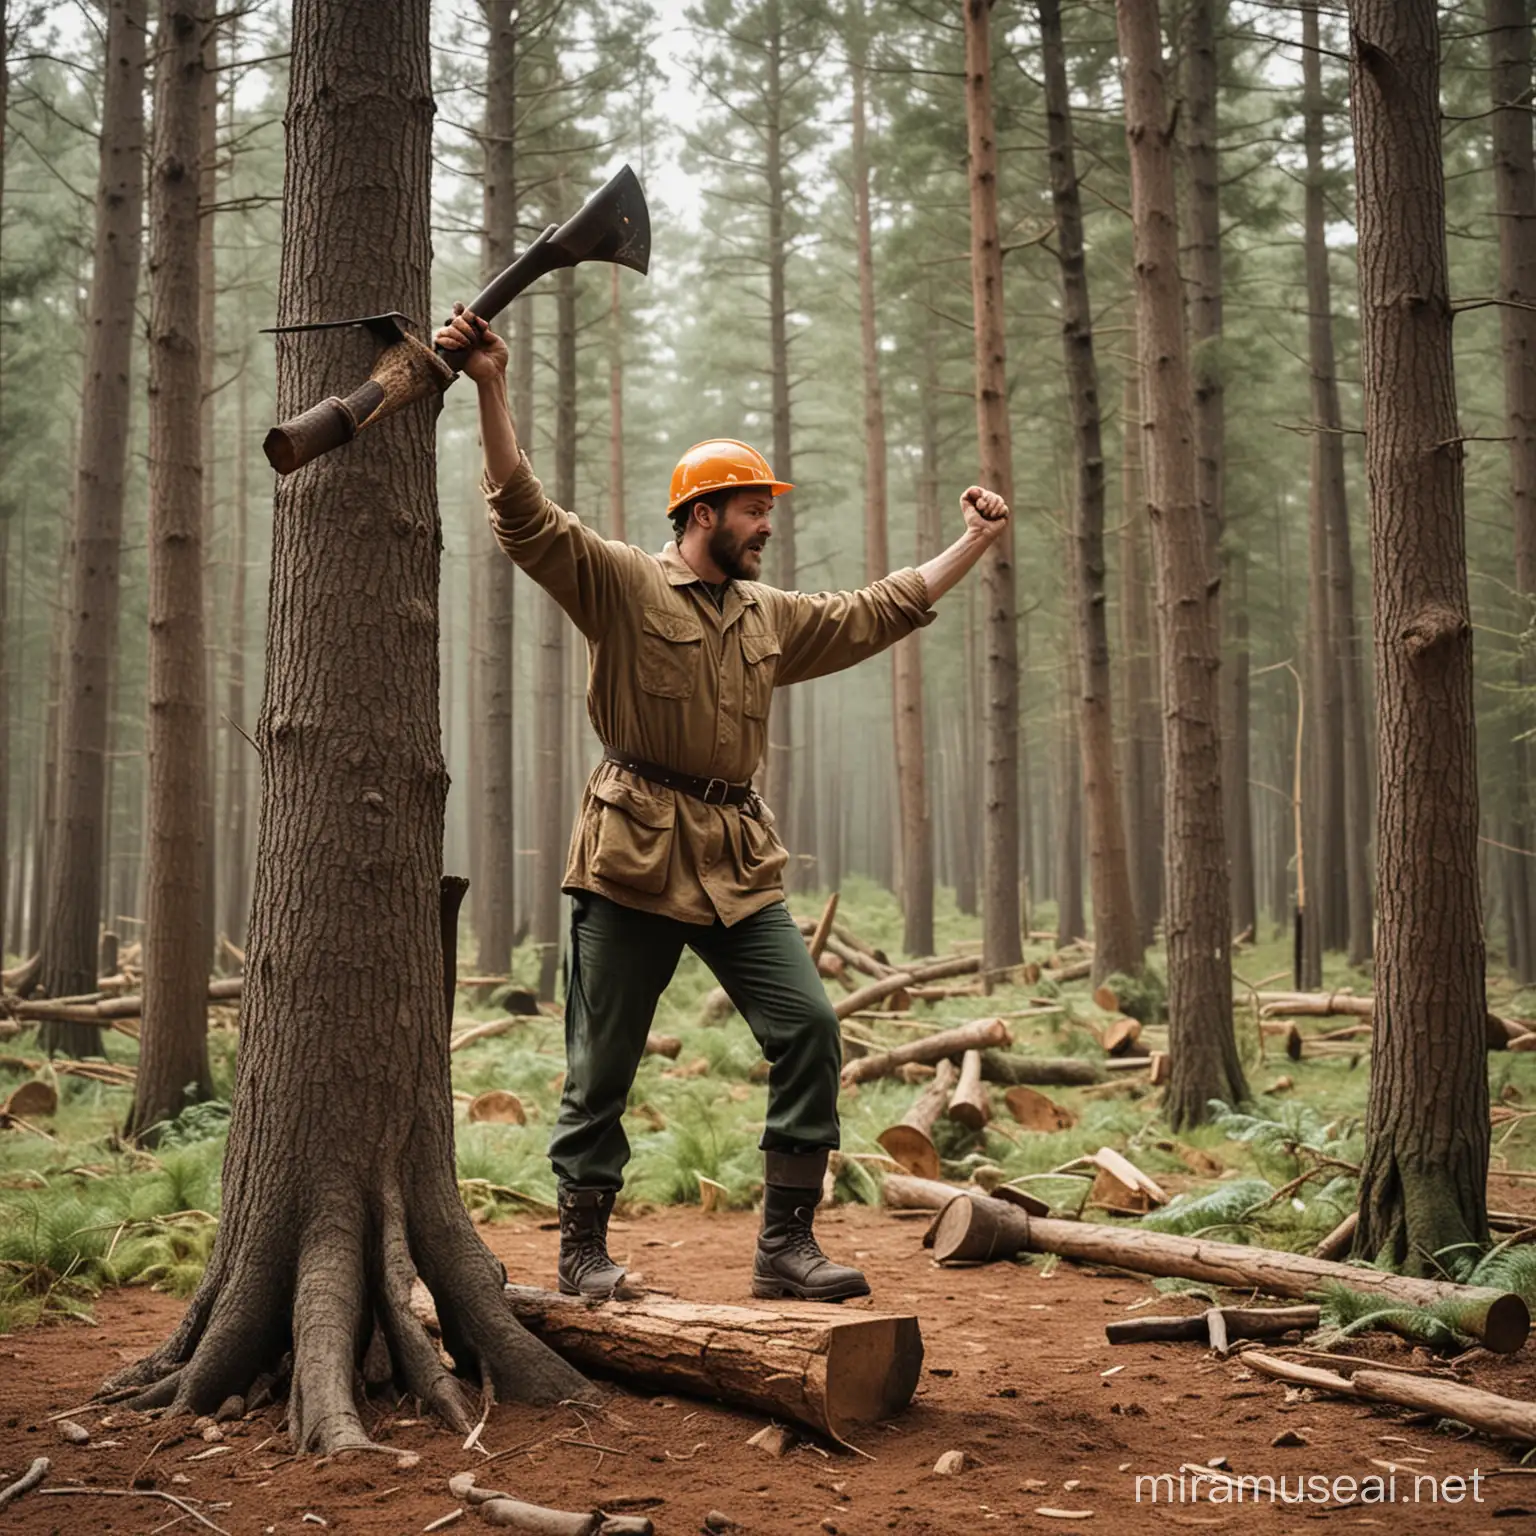 Forestry Worker Felling Tree with Axe in Forest